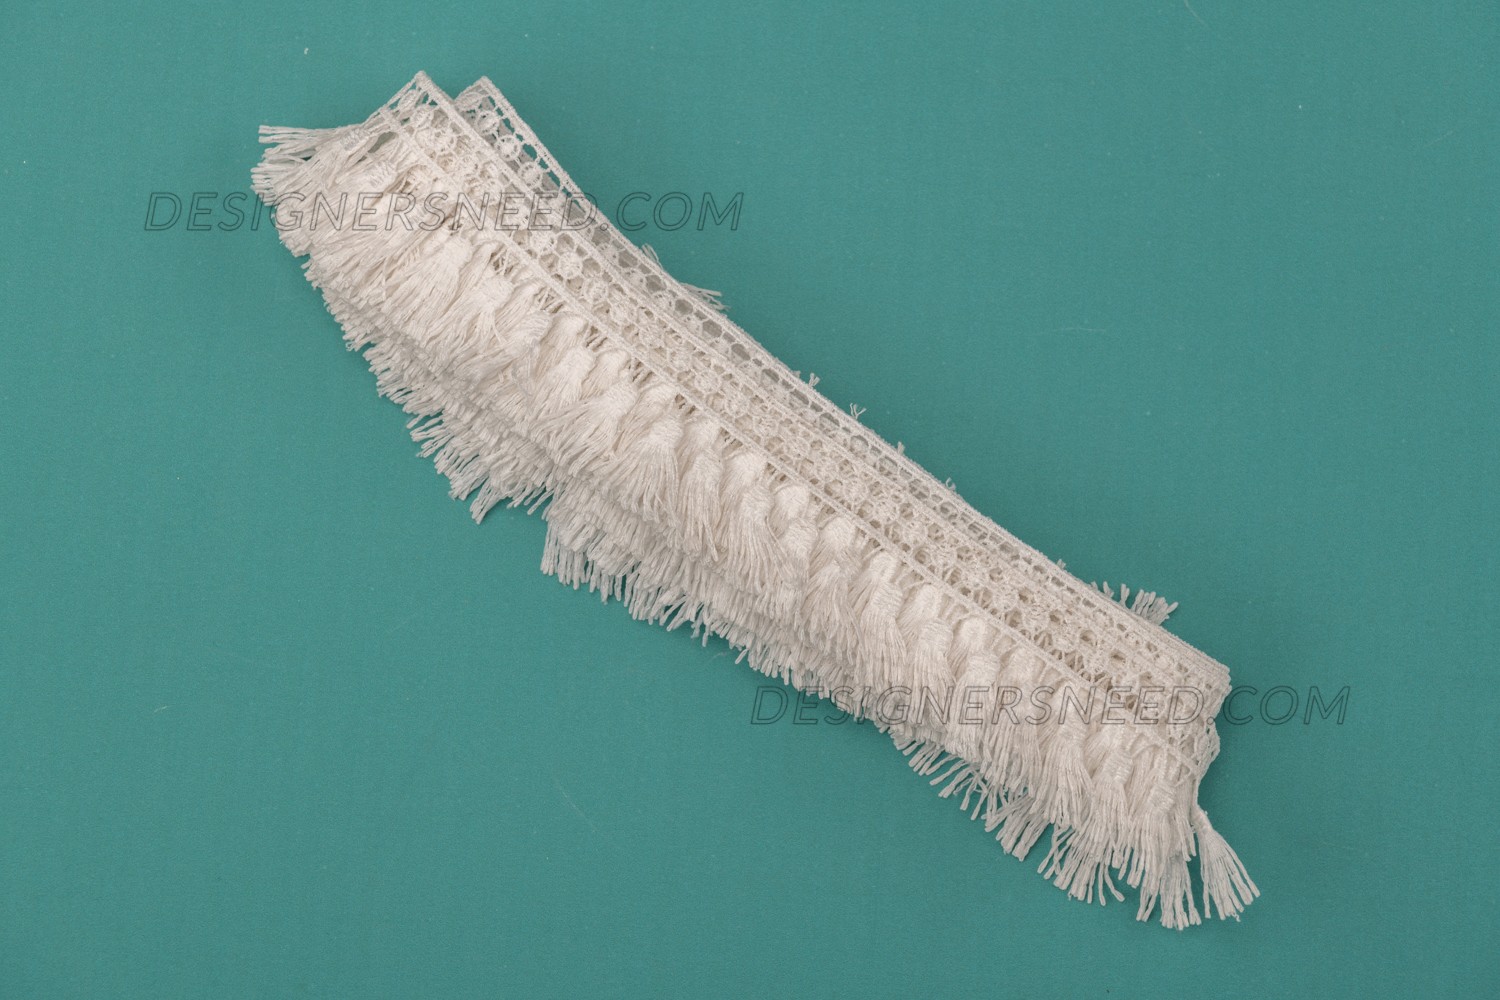 GPO Lace Polyester in White Color - Designers Need